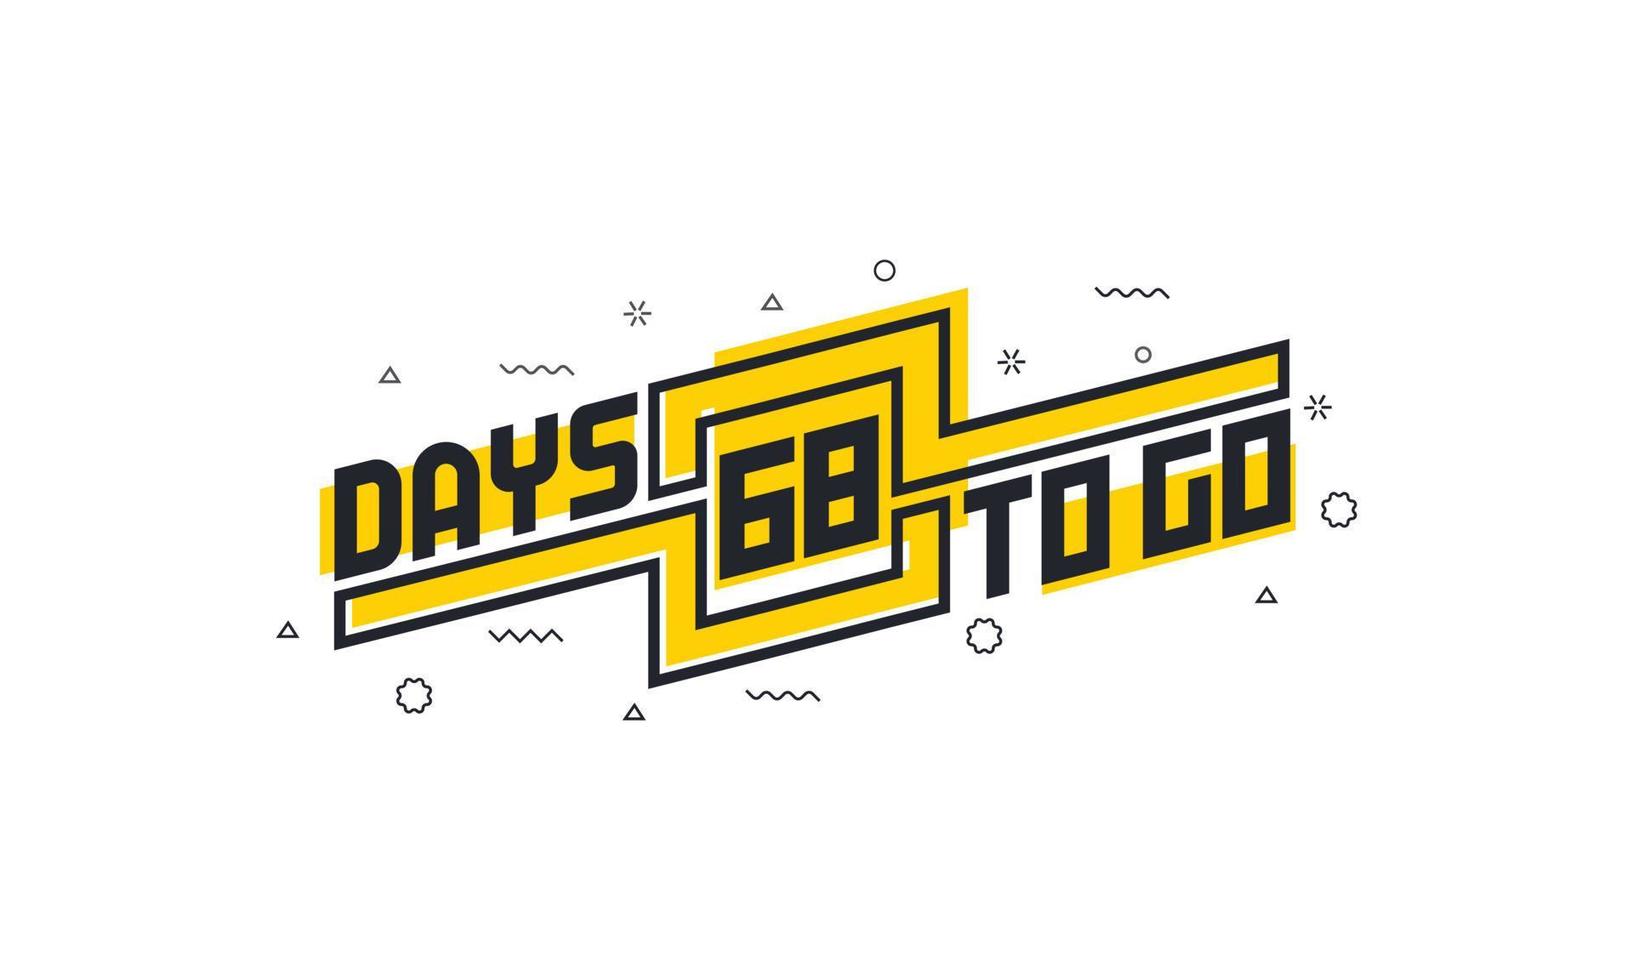 68 days to go countdown sign for sale or promotion. vector